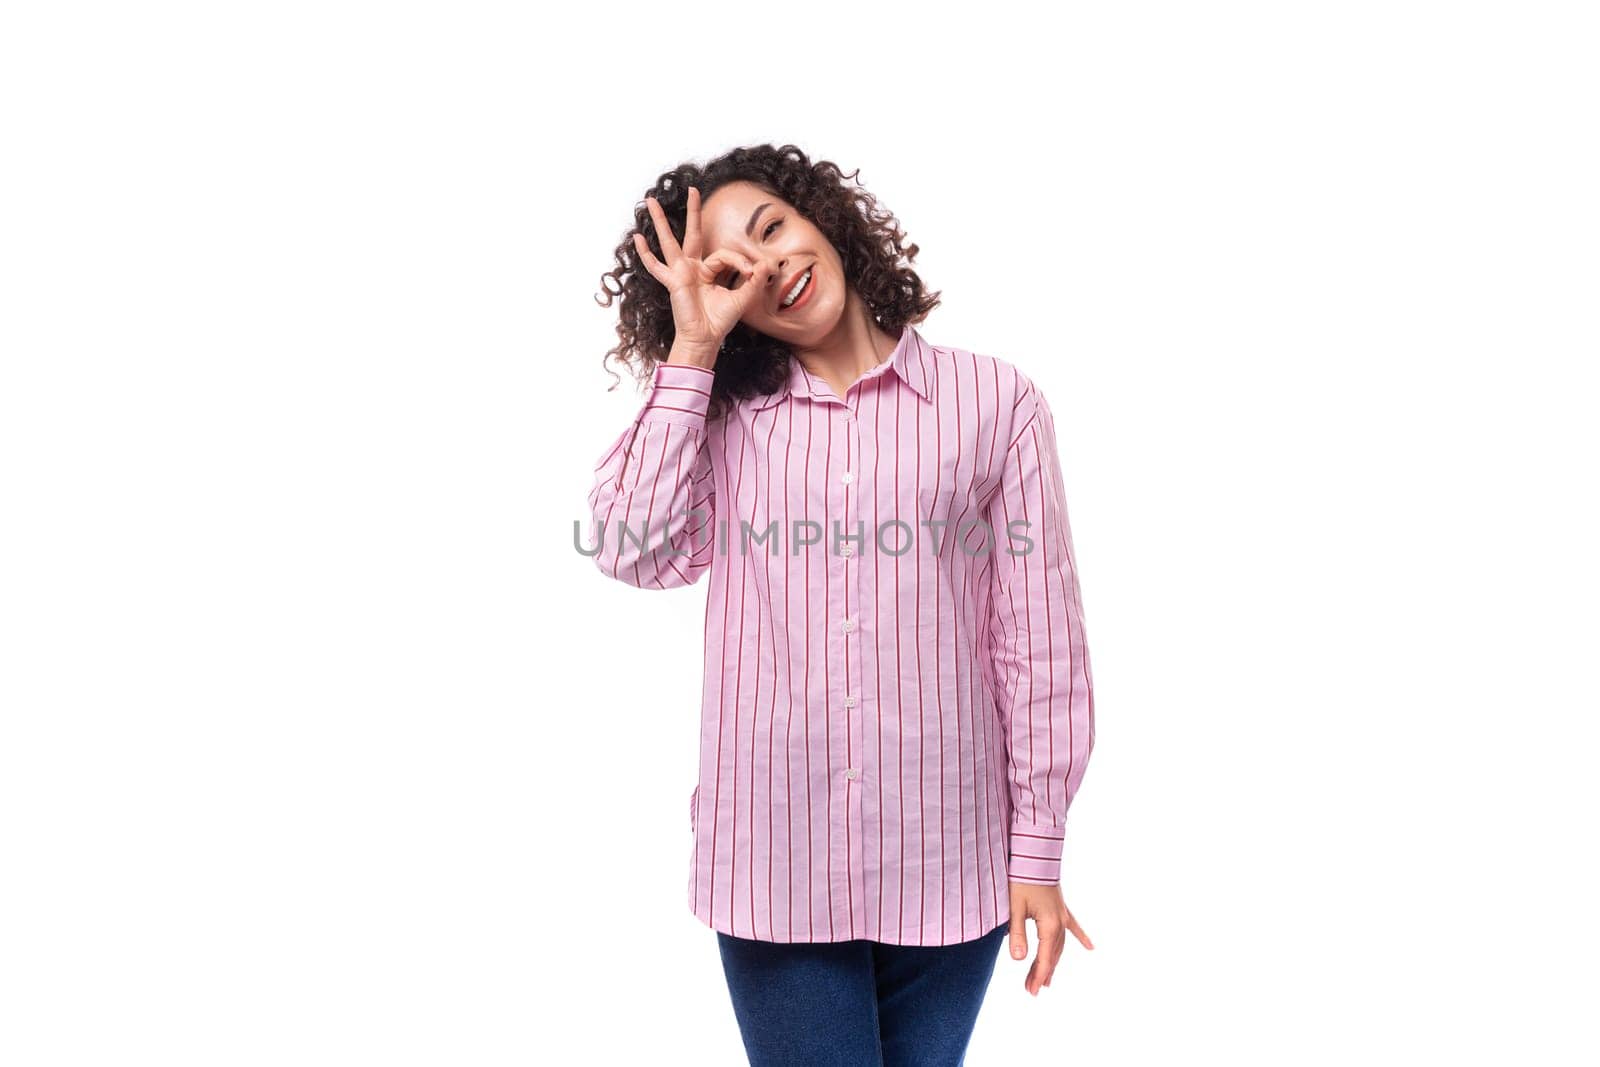 young leader woman with curly hair dressed in a pink shirt and jeans by TRMK